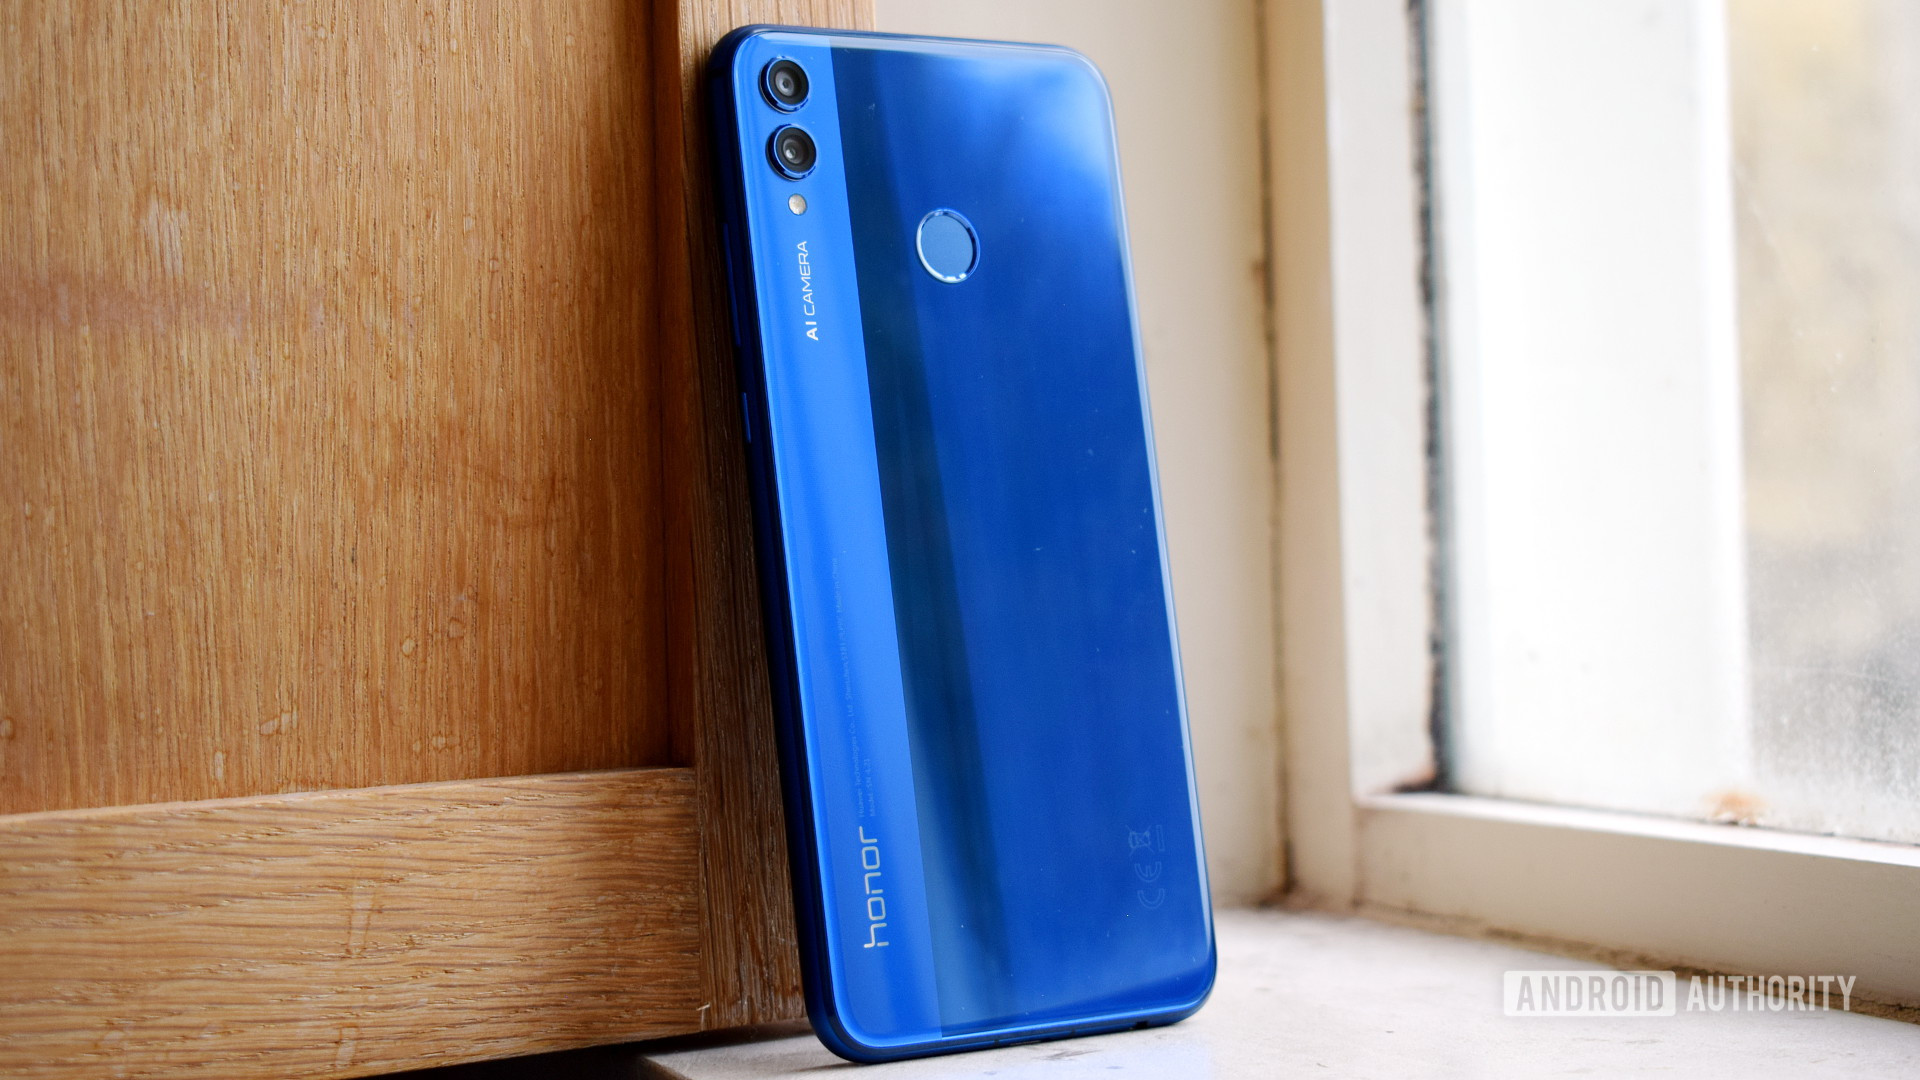 The back of the HONOR 8X.